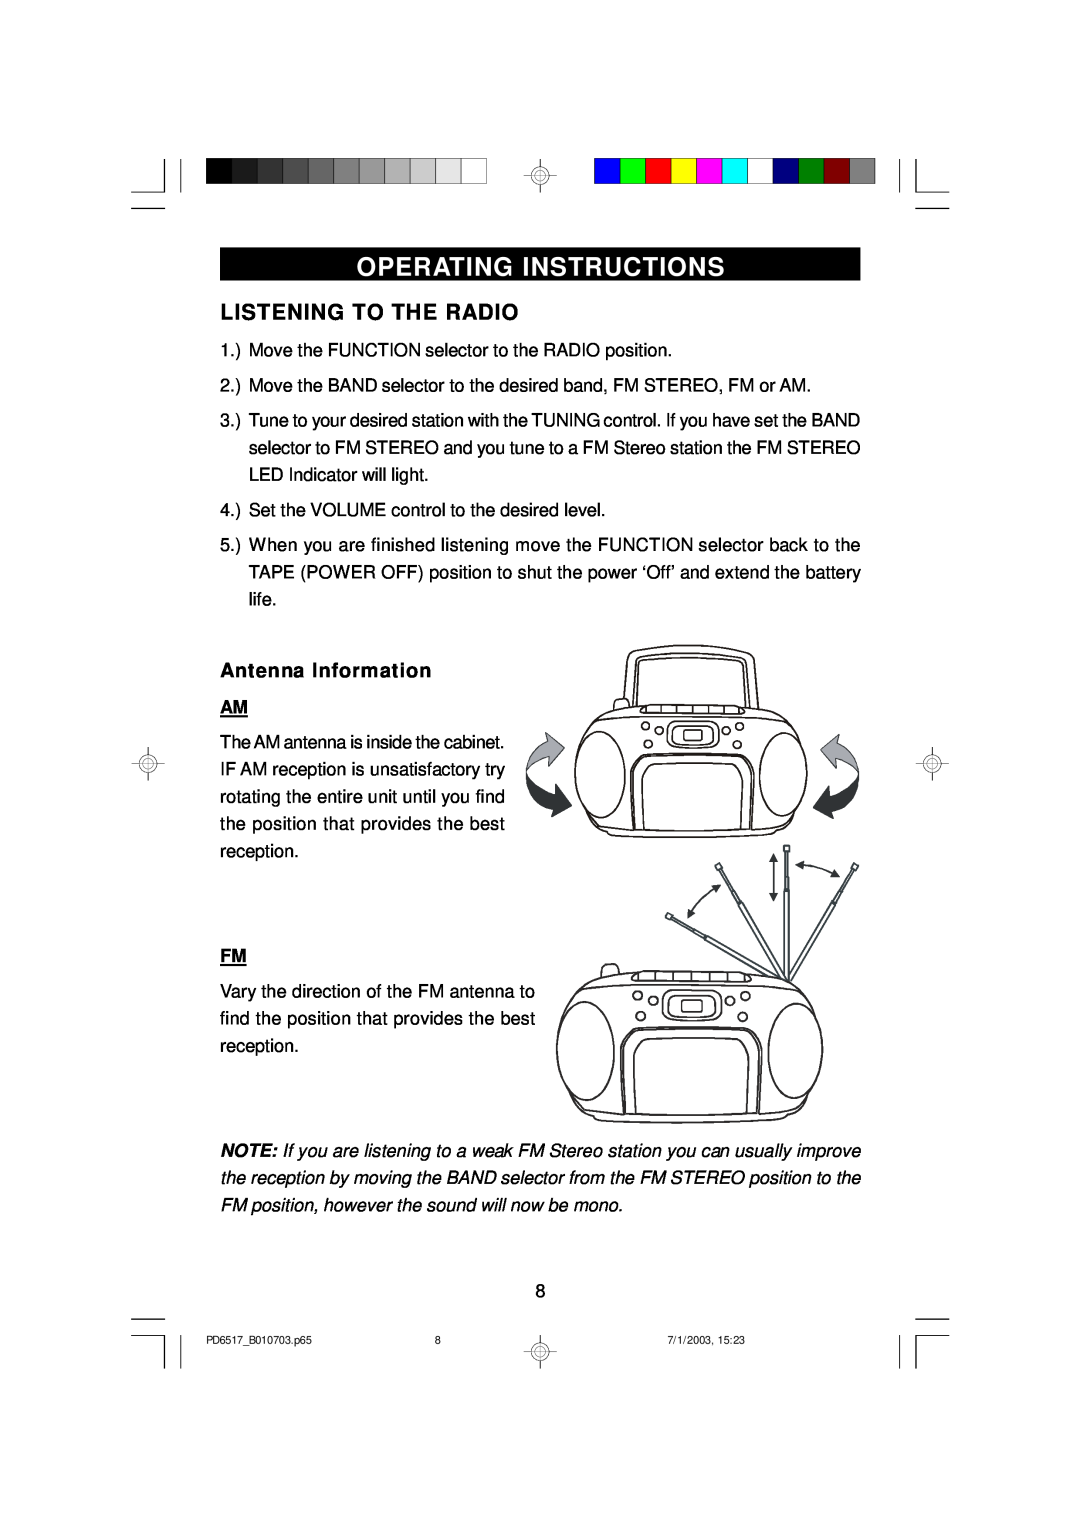 Emerson PD6517 owner manual Operating Instructions, Listening To The Radio, Antenna Information 